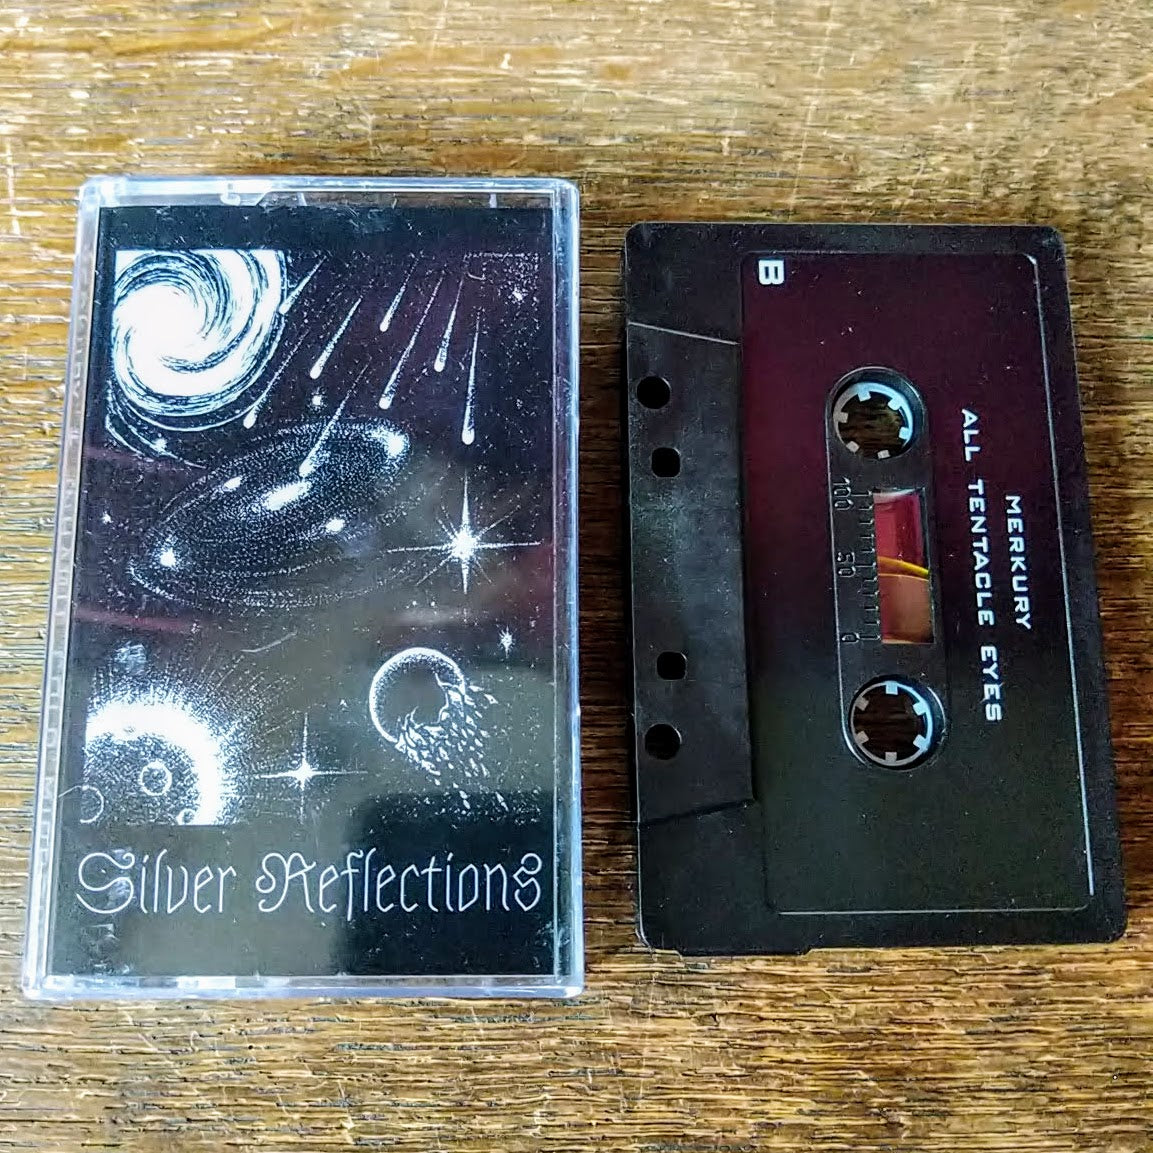 [SOLD OUT] MERKURY "Silver Reflections" Cassette Tape